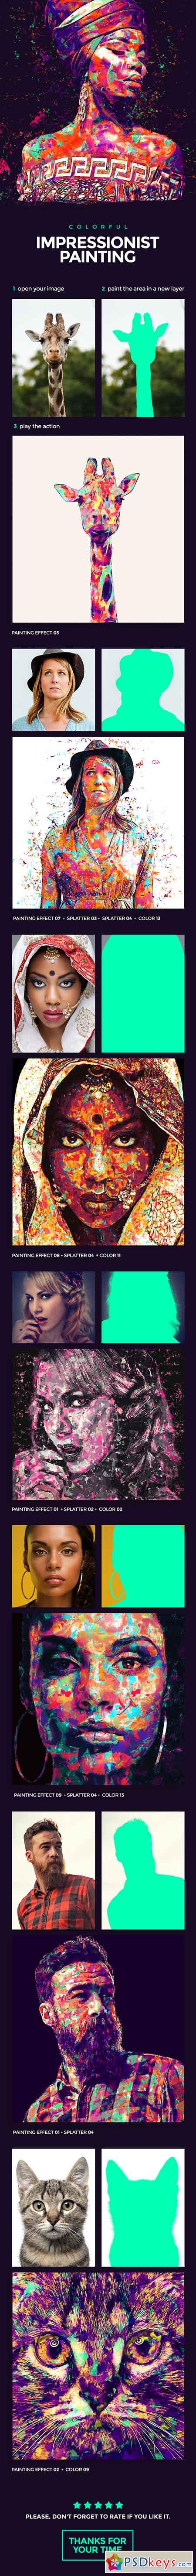 Colorful Impressionist Painting Photoshop Action 16924846